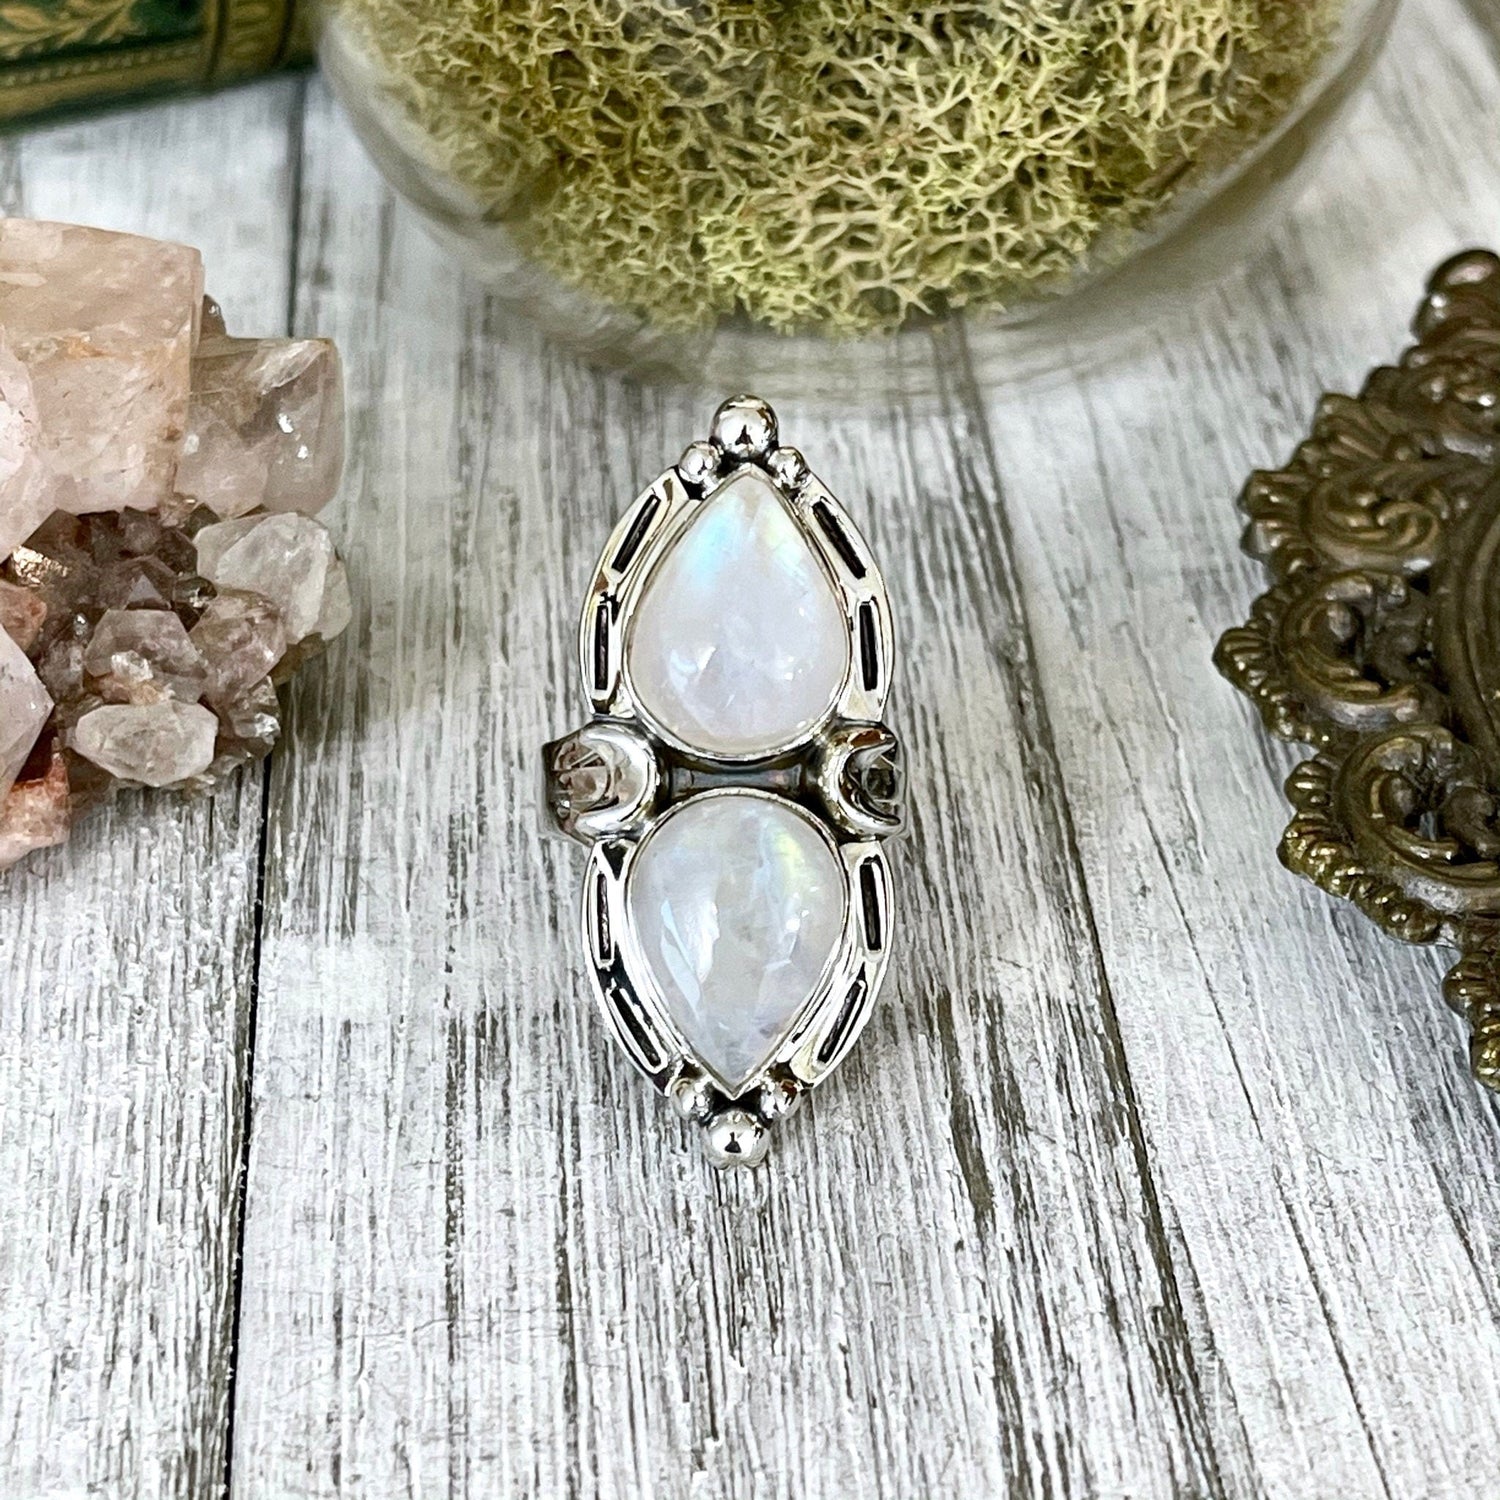 Mystic Moons Rainbow Moonstone Crystal Ring in Solid Sterling Silver- Designed by FOXLARK Collection Size 5 6 7 8 9 10 11